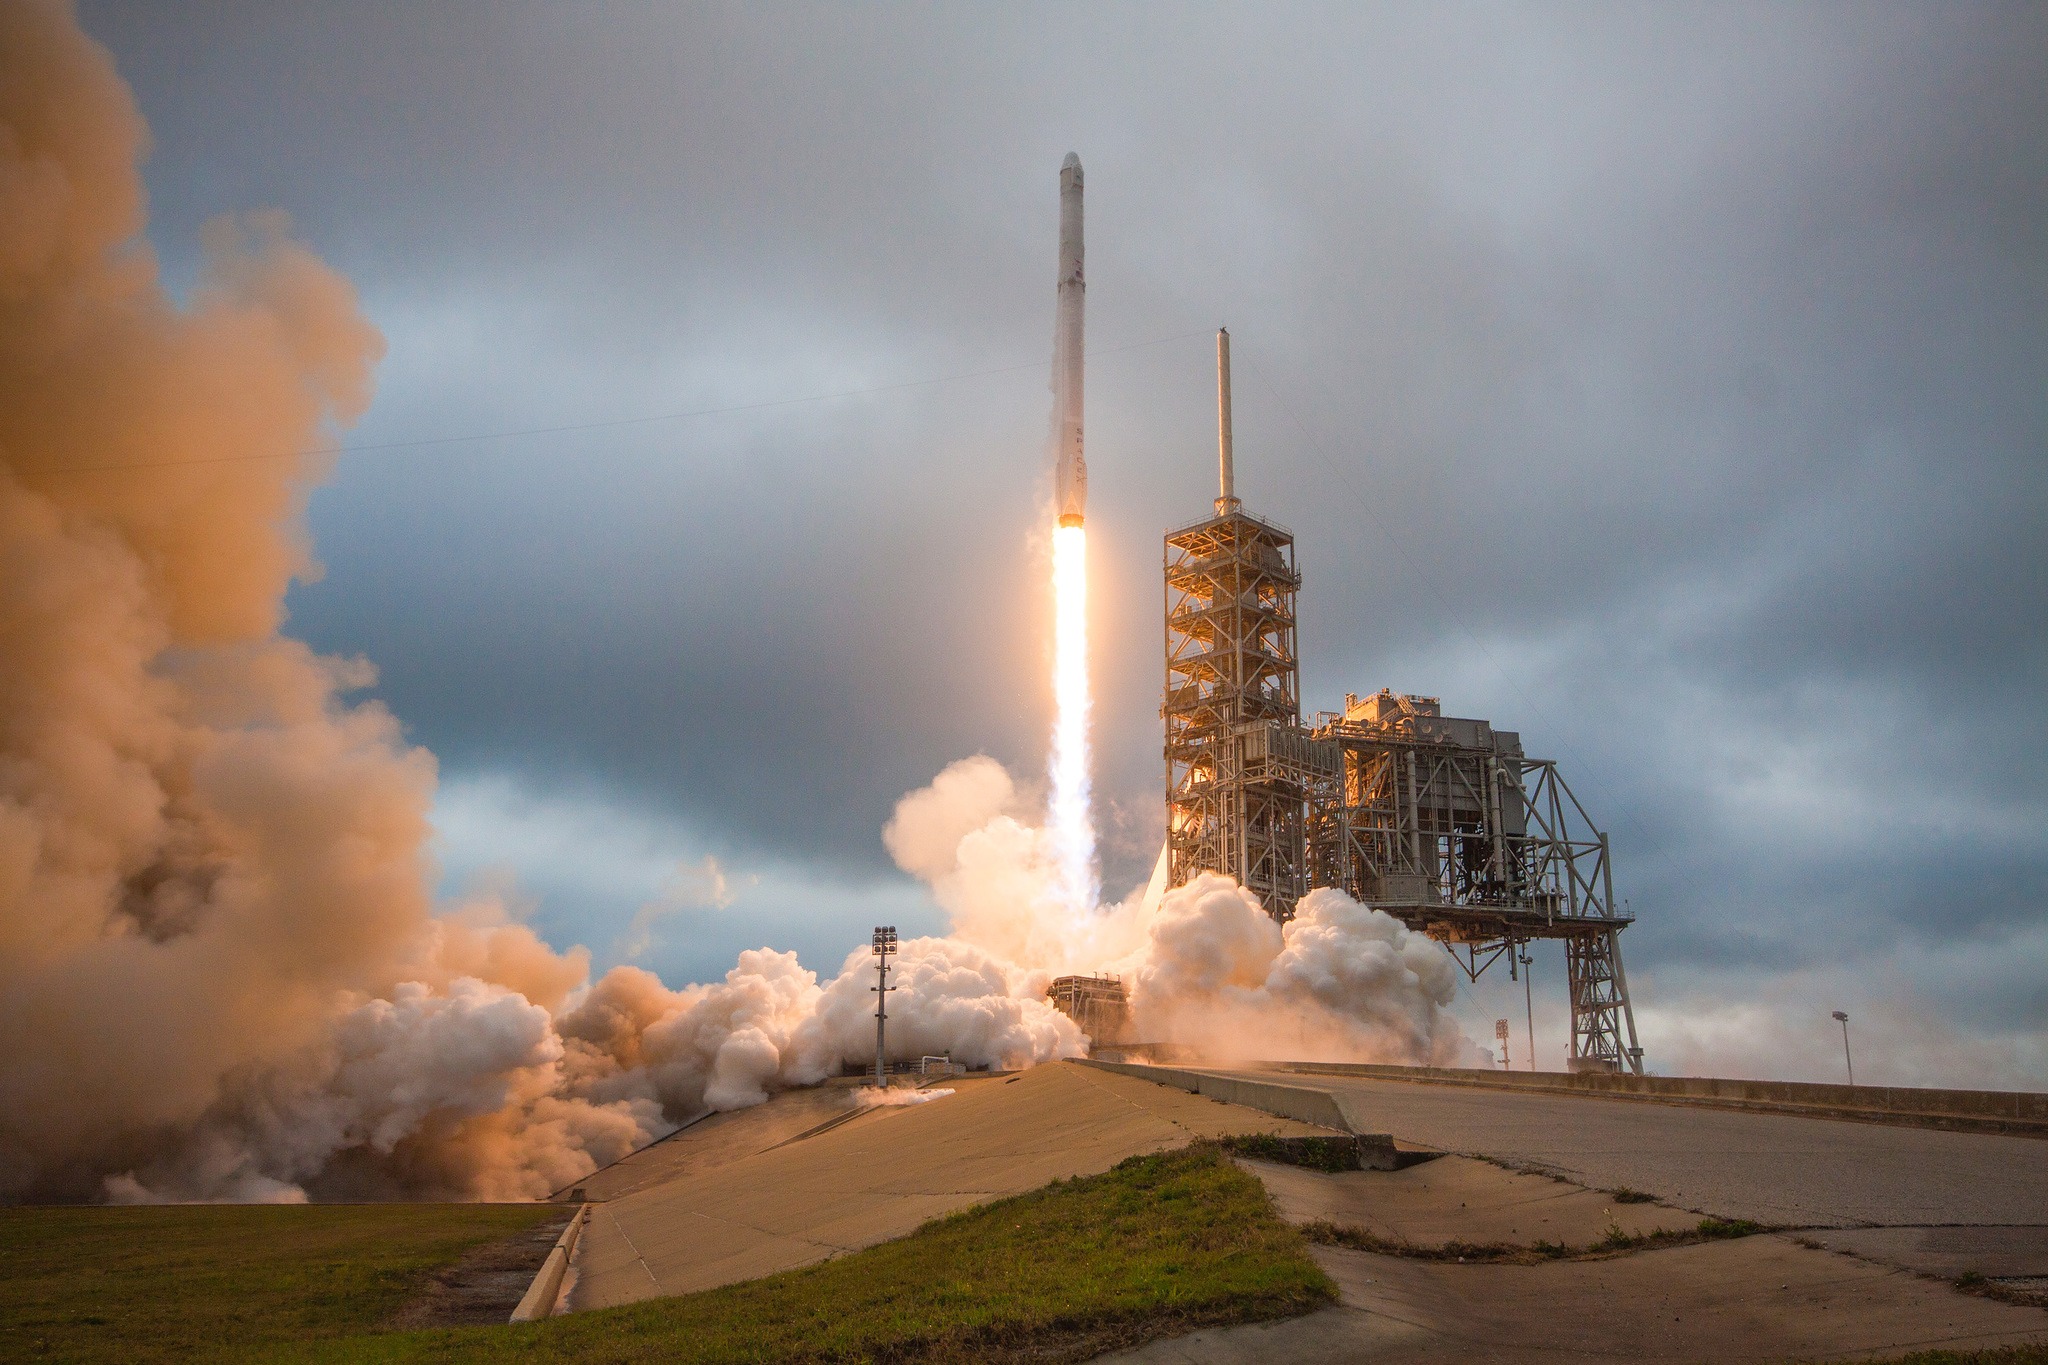 The Falcon 9 rocket Dragon launches from the Kennedy Space Center on Feb. 19 (Photo courtesy of SpaceX).